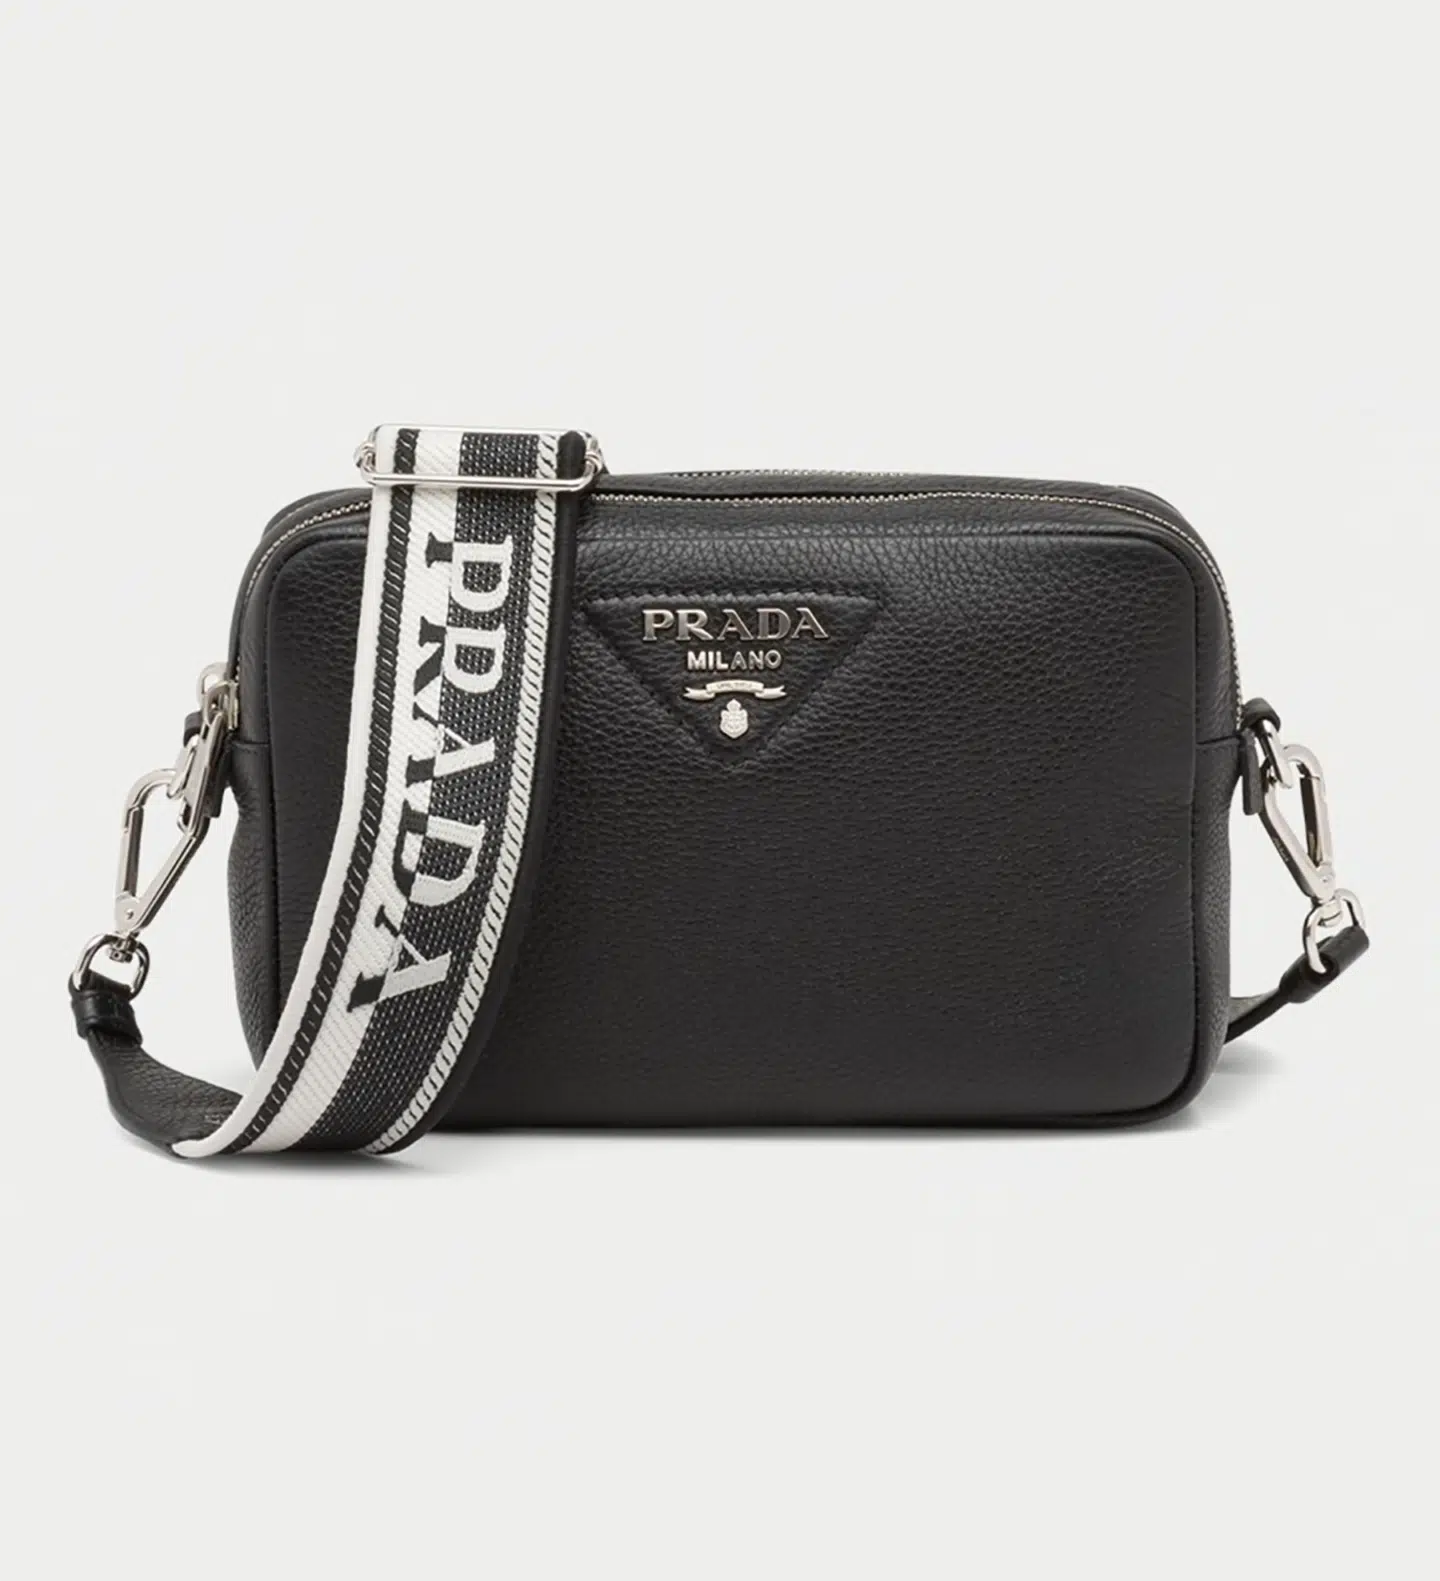 Buy Black Small Leather Cross-Body Bag from the Next UK online shop